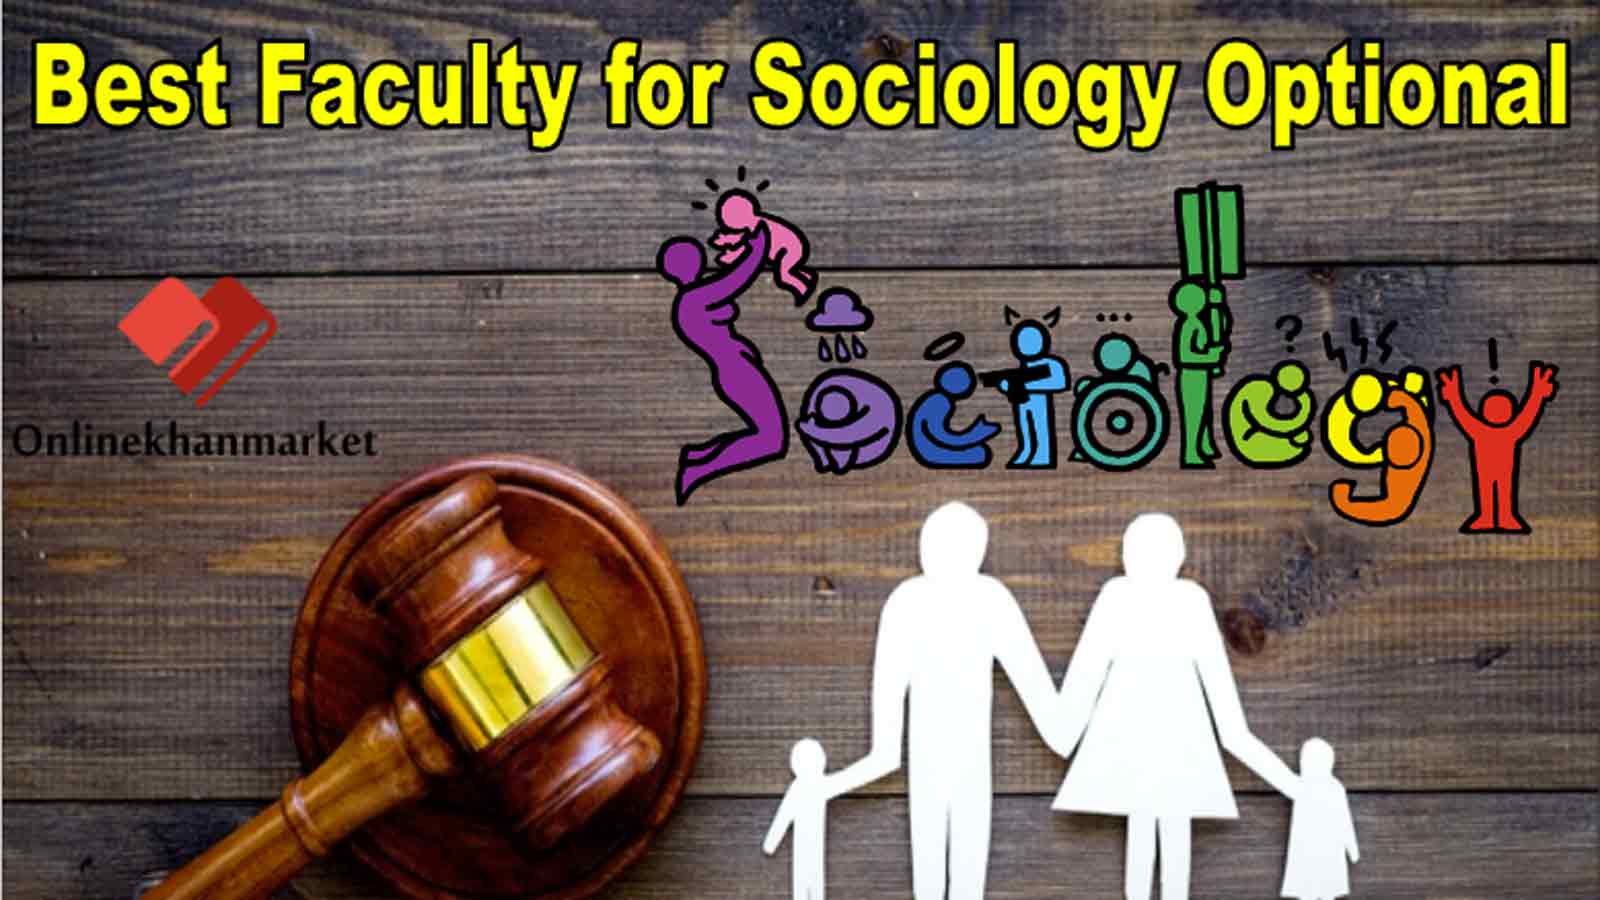 Best Faculty for Sociology Optional UPSC Exam